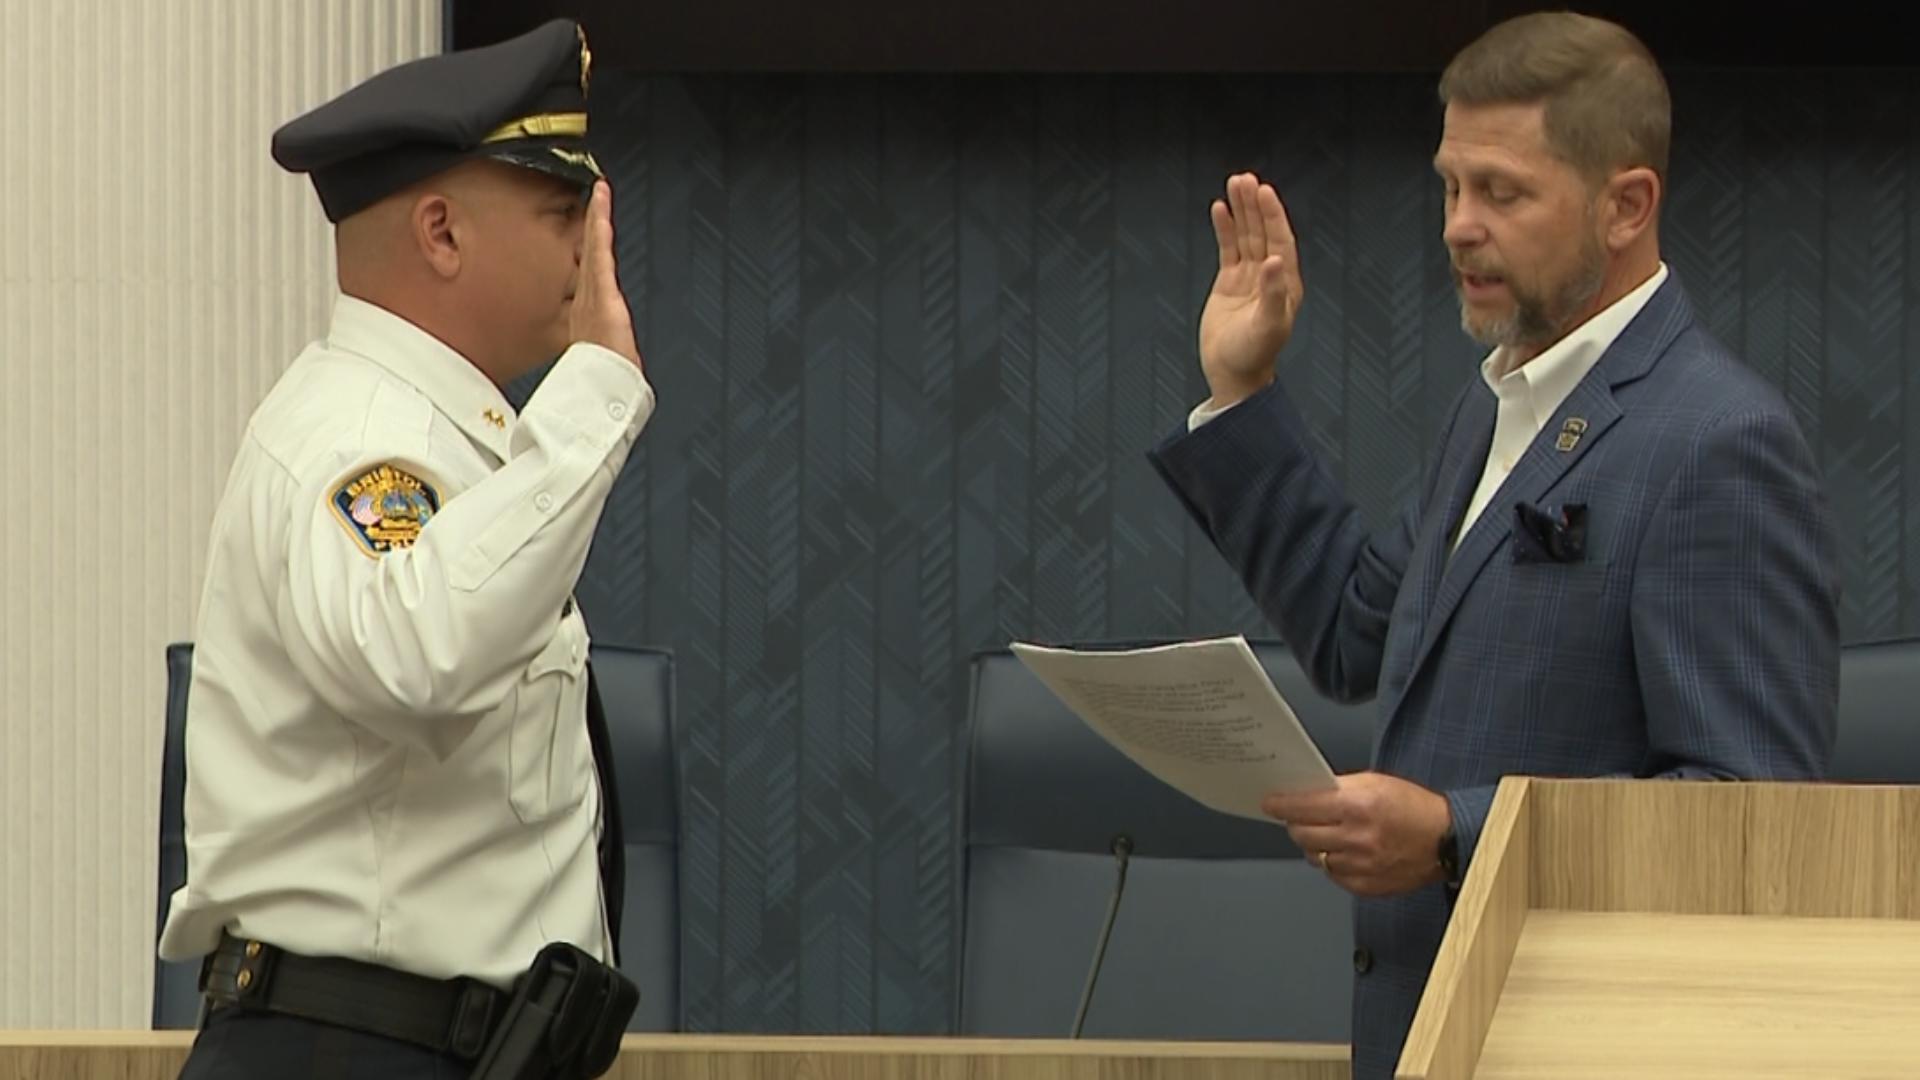 Mark Morello, who has been acting as the city's interim police chief, was officially sworn in Wednesday morning.